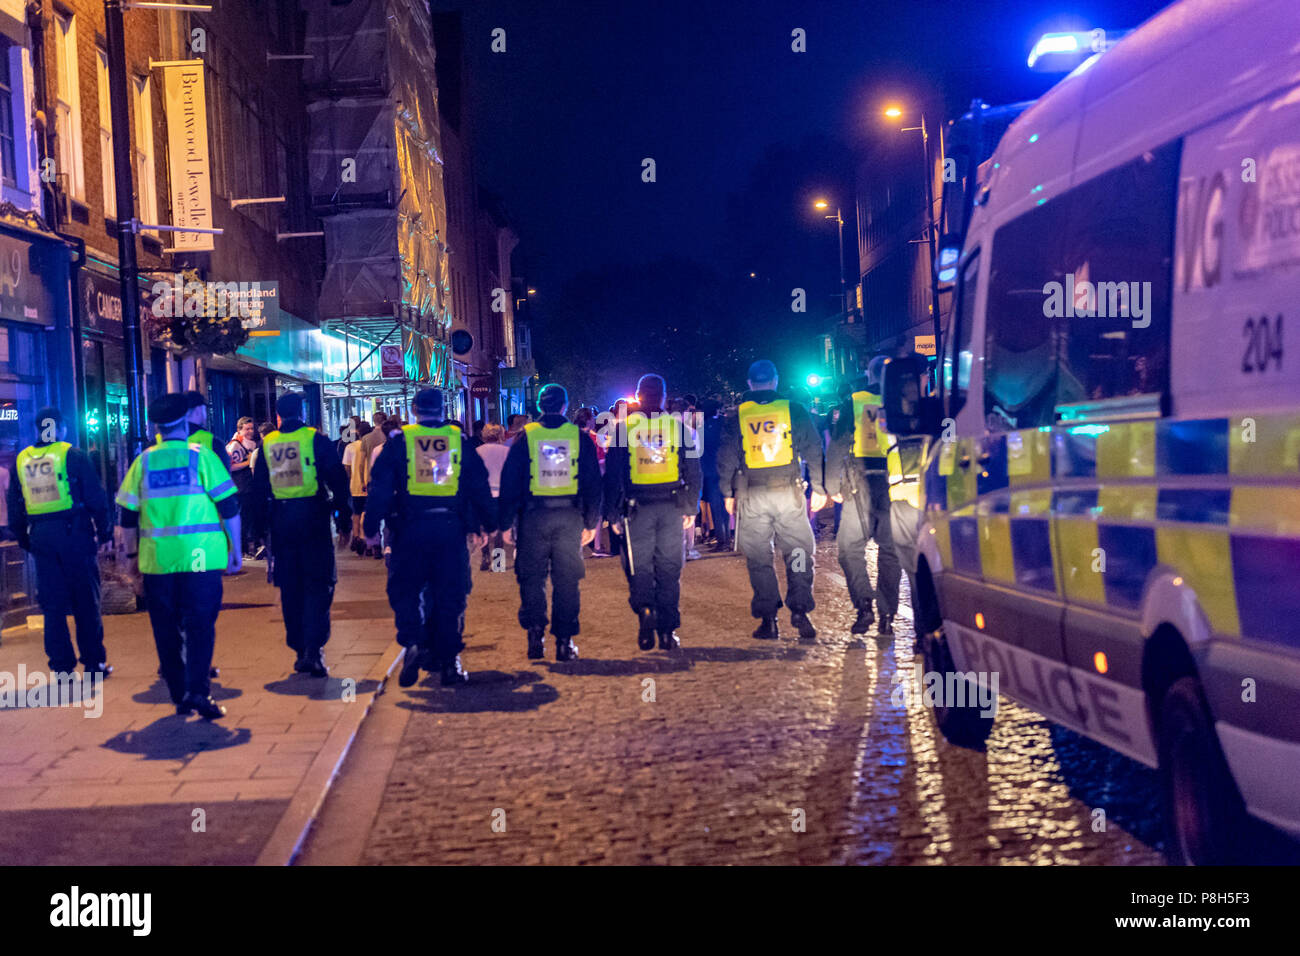 Brentwood Essex11th June 2018 Approximately fifty police officers deployed in Brentwood Essex  following England losing against Croatia.  Fans tears turned to disorder and Essex police had to clear fans down the entire length of the High Street.  One small group of fans challenged the police and arrests were made. Credit Ian Davidson/Alamy Live News Stock Photo